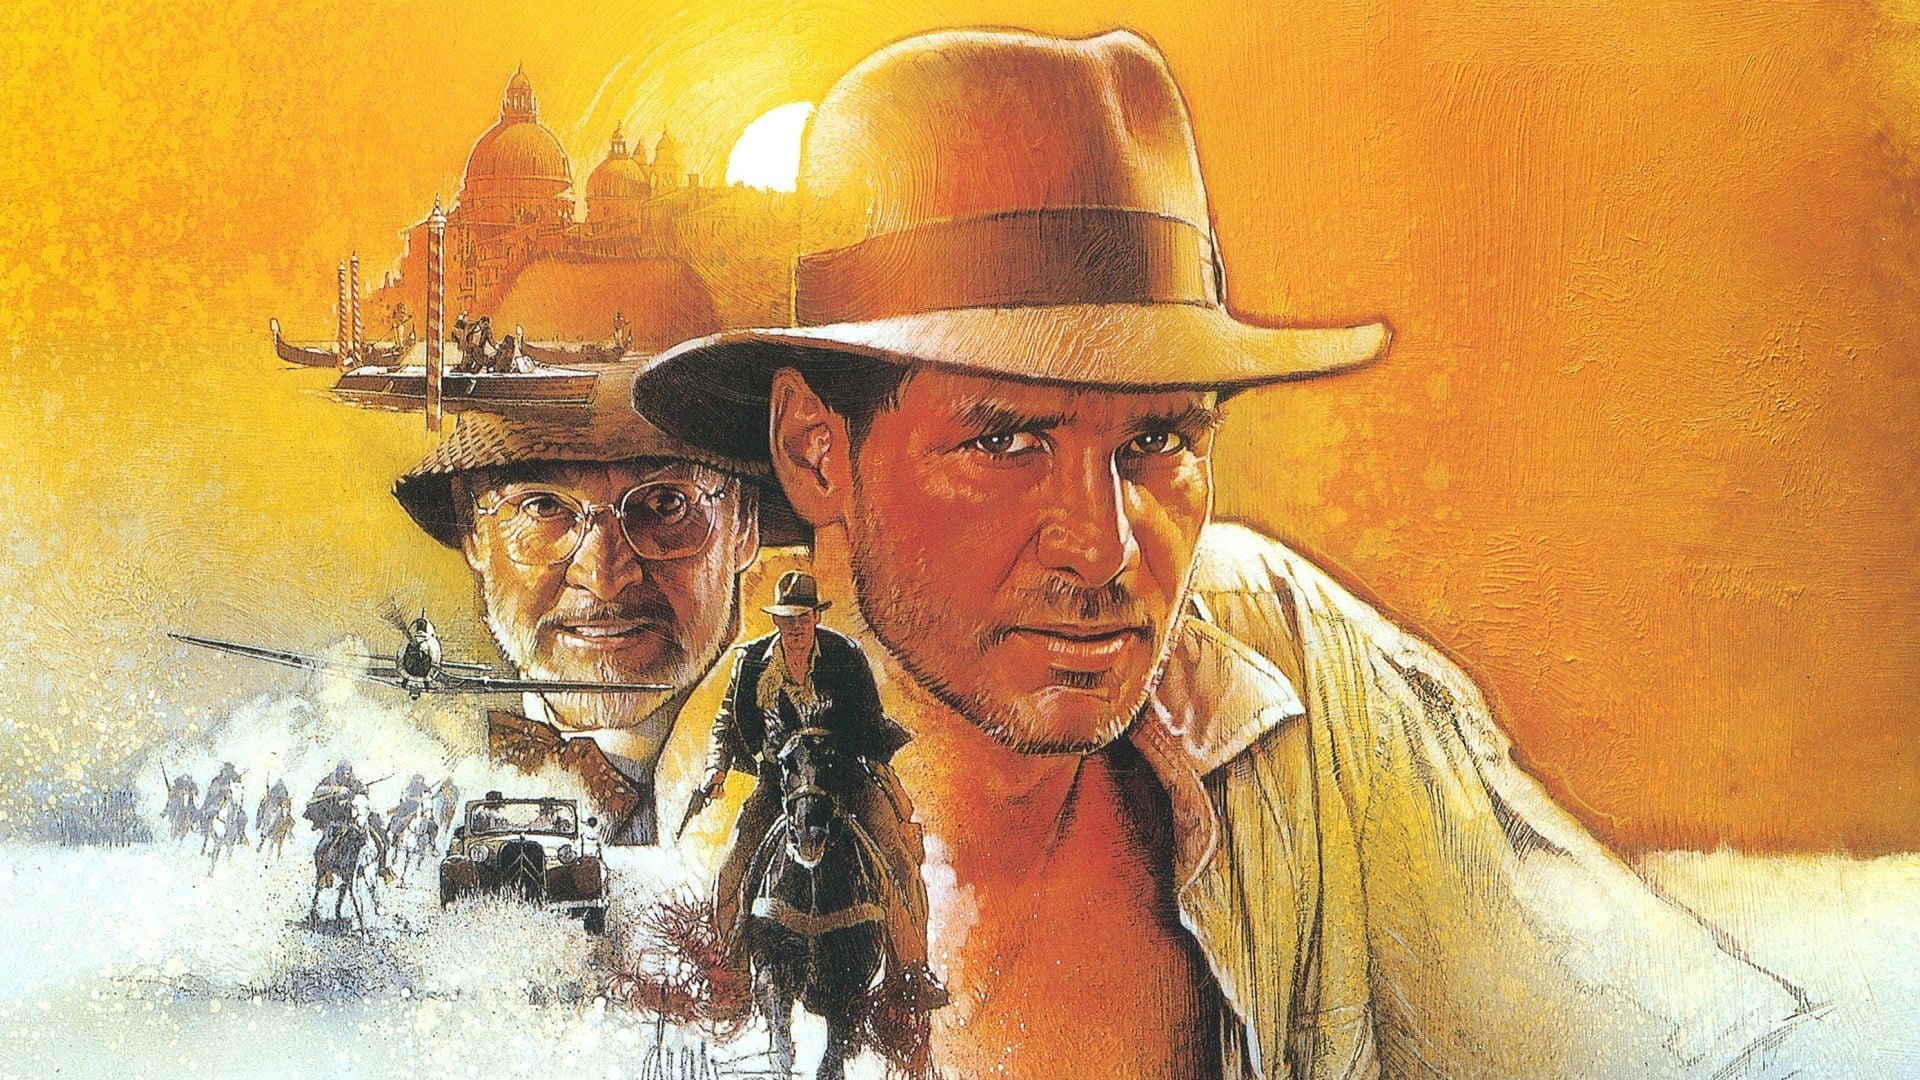 Indiana Jones and the Last Crusade wallpaper, movies, Indiana Jones, Indiana Jones and the Last Crusade, Harrison Ford